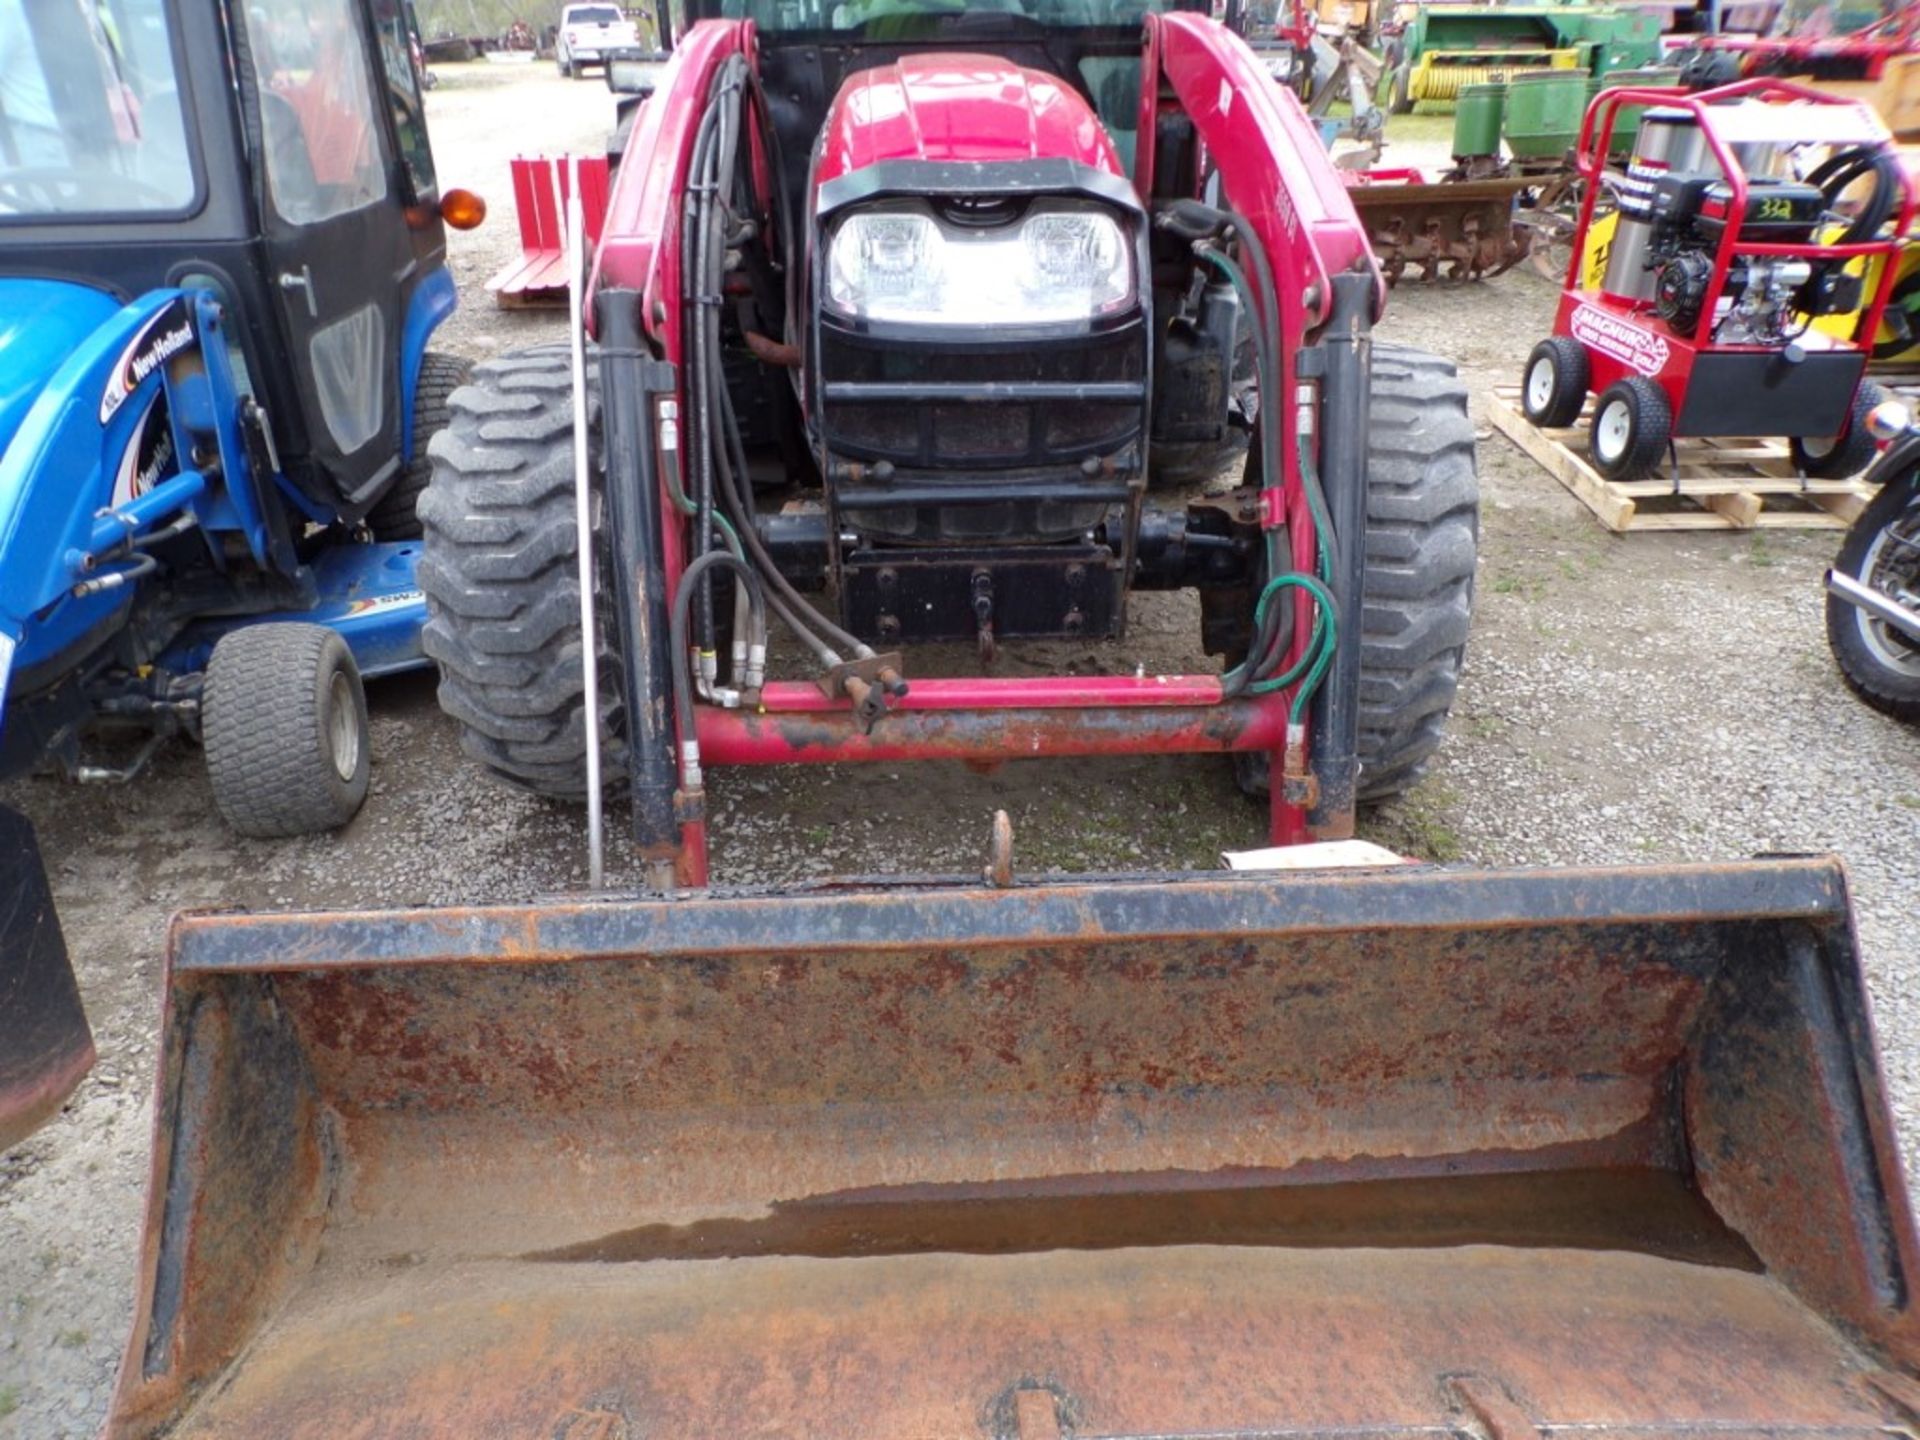 Mahindra 3550P 4 WD Tractor w/3550 CL Loader, Full Cab, 1551 Hours, Single Rear Hydraulics, 3 PT - Image 5 of 6